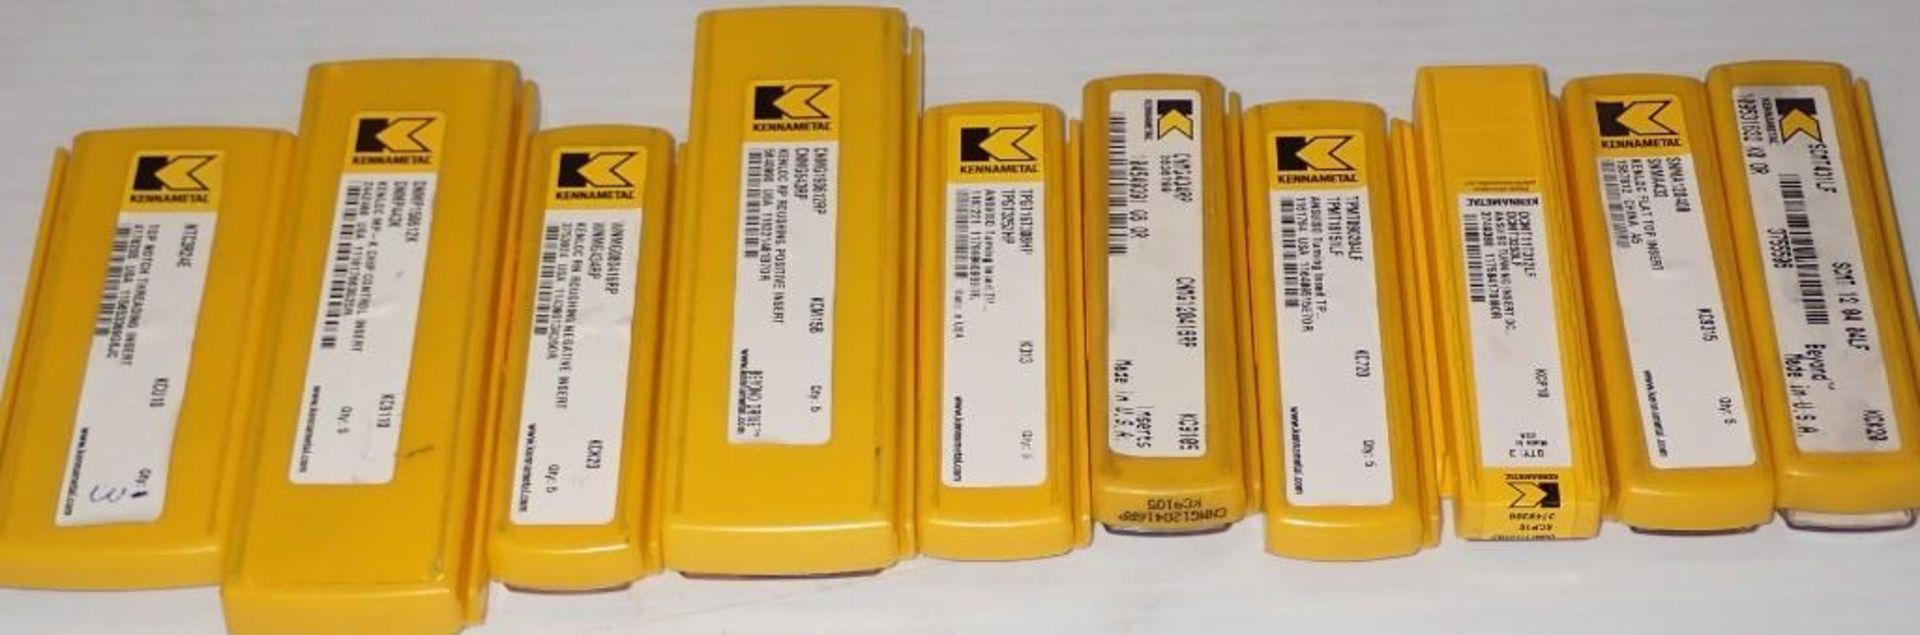 Lot of Kennametal Carbide Inserts - Image 5 of 7